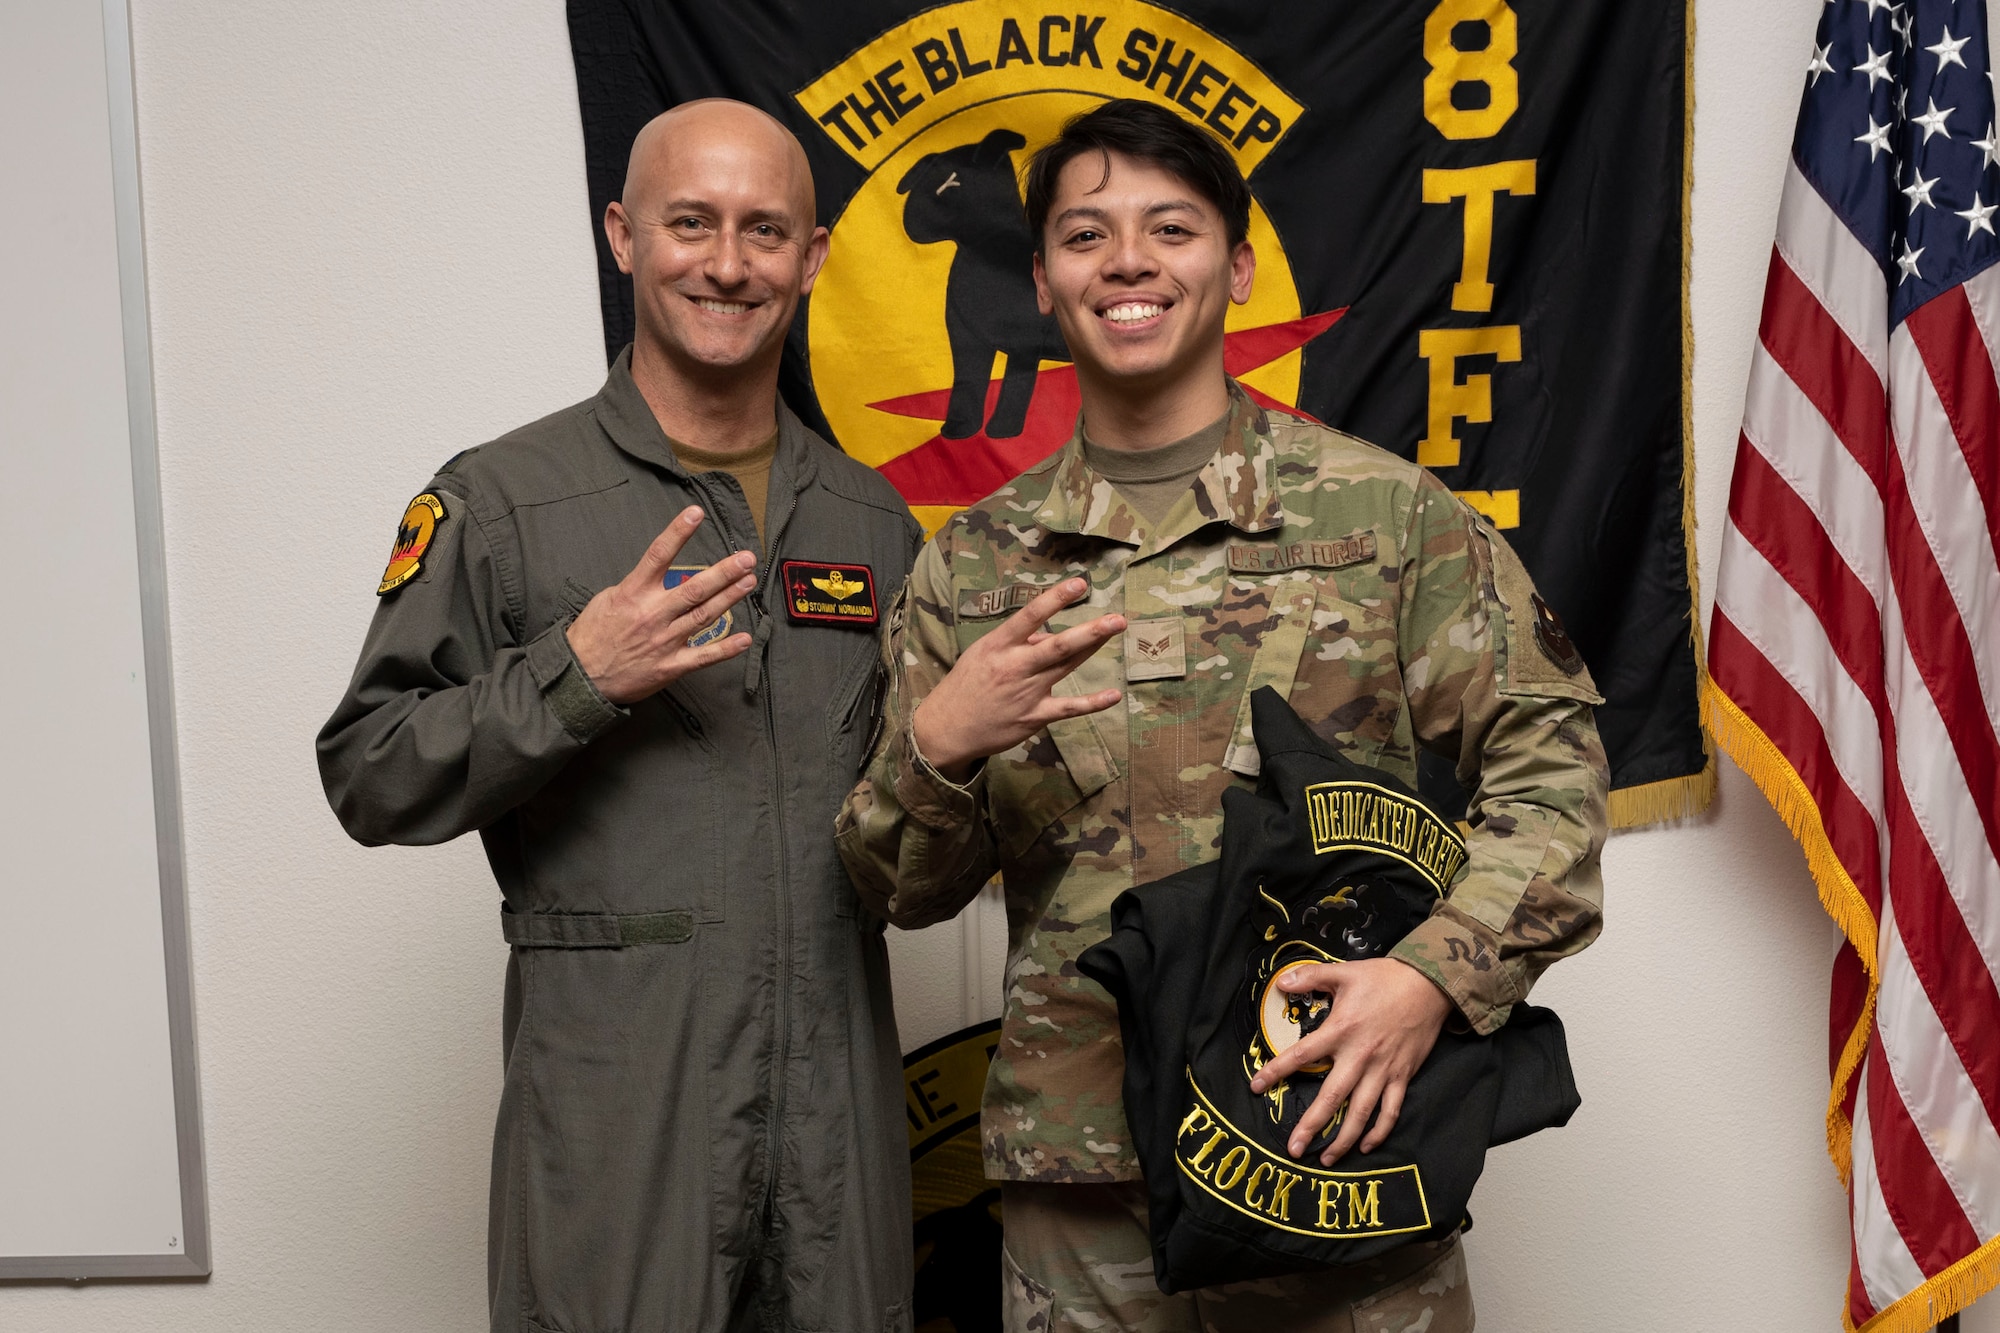 U.S. Air Force Senior Airman Anthony Gutierrez, 8th Aircraft Maintenance Unit crew chief, right, poses for a photo with U.S. Air Force Lt. Col. George Normandin, 8th Fighter Squadron commander, during a Dedicated Crew Chief Appointment ceremony at Holloman Air Force Base, New Mexico, Jan. 3, 2022. To receive the title of DCC, a crew chief must demonstrate a history of superior performance in their career, comply with all safety practices and complete all required training. (U.S. Air Force photo by Senior Airman Antonio Salfran)